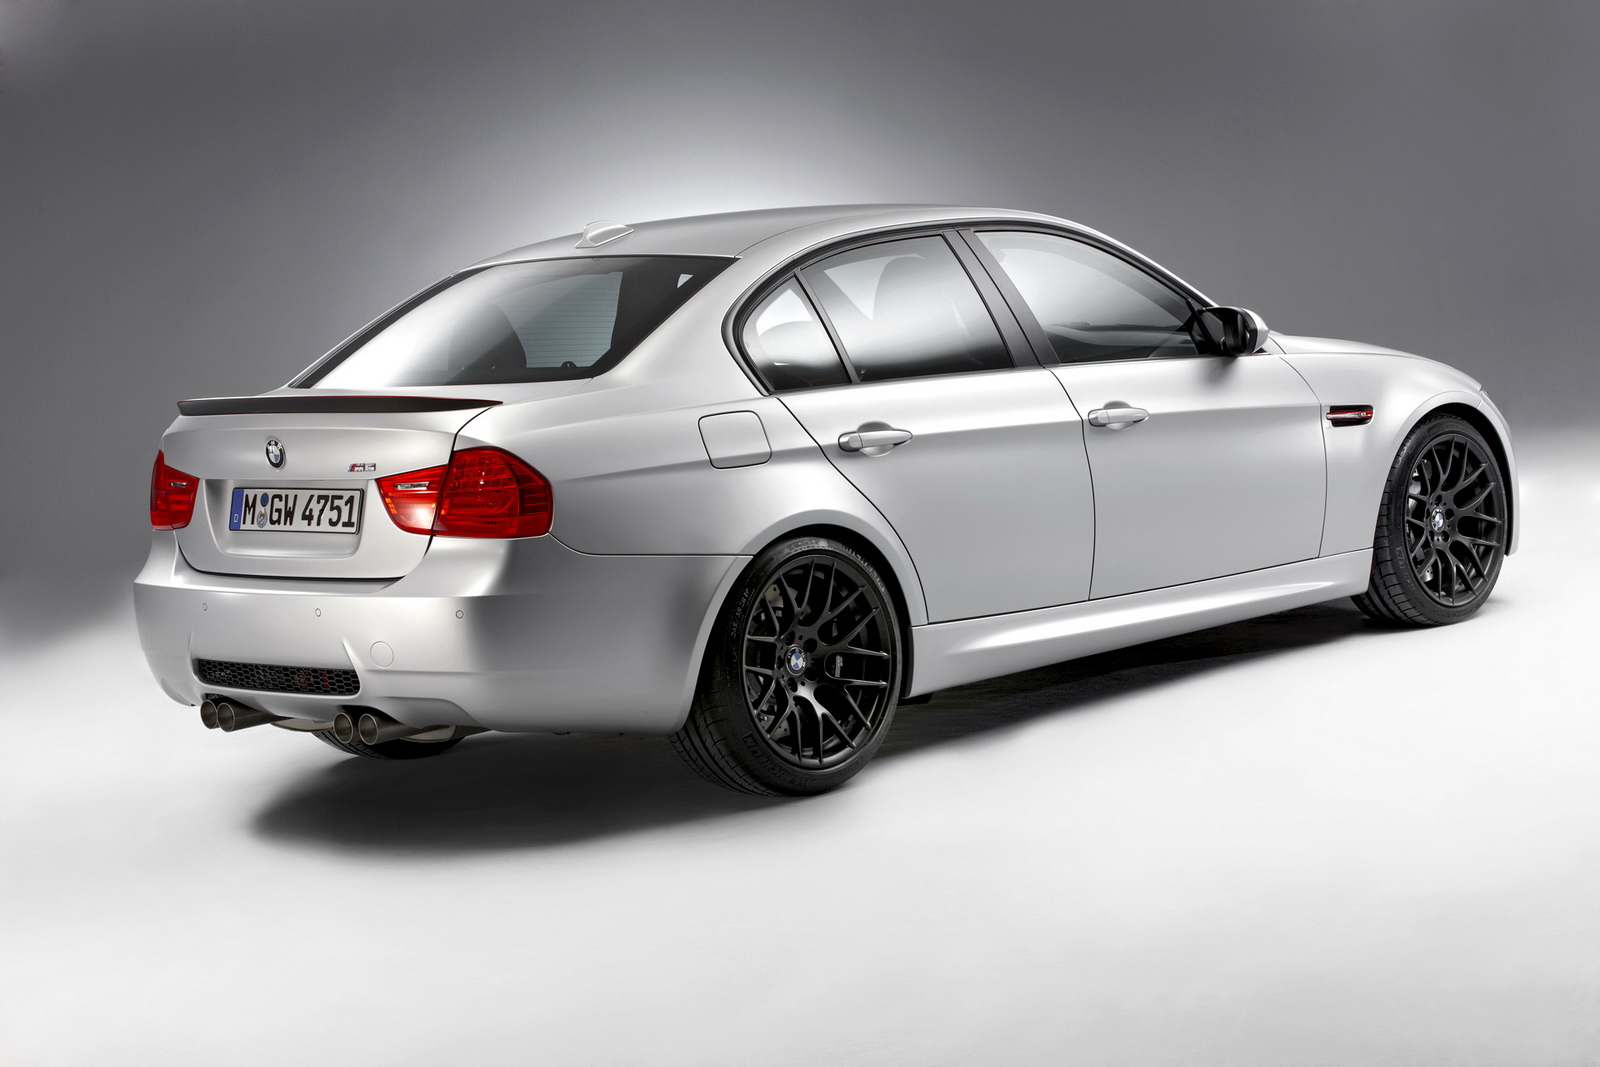 BMW M3 CRT   Limited edition high performance sports car from the